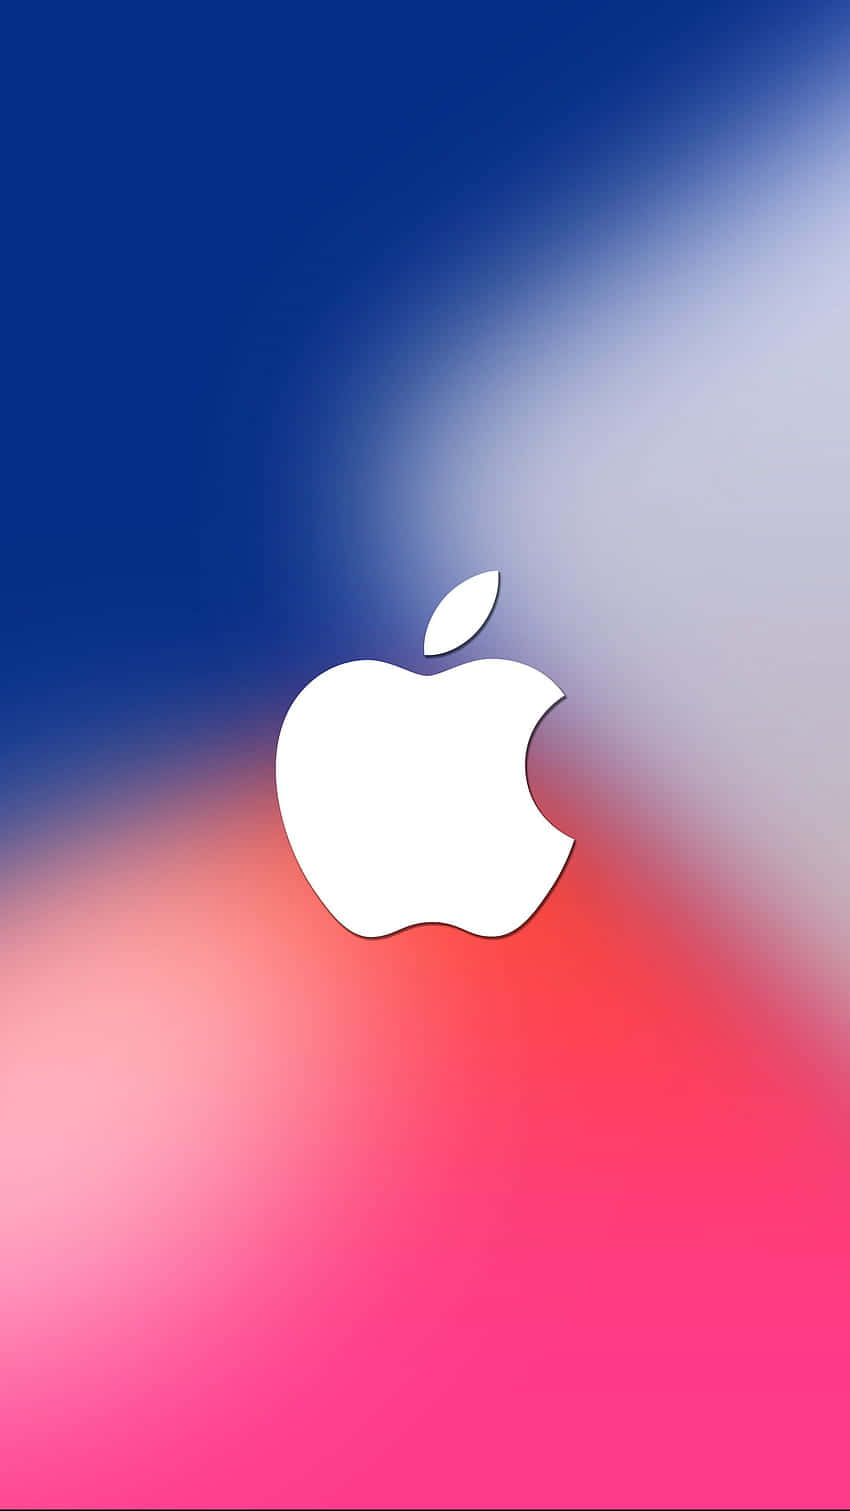 Apple Logo Iphone X Colorful Background